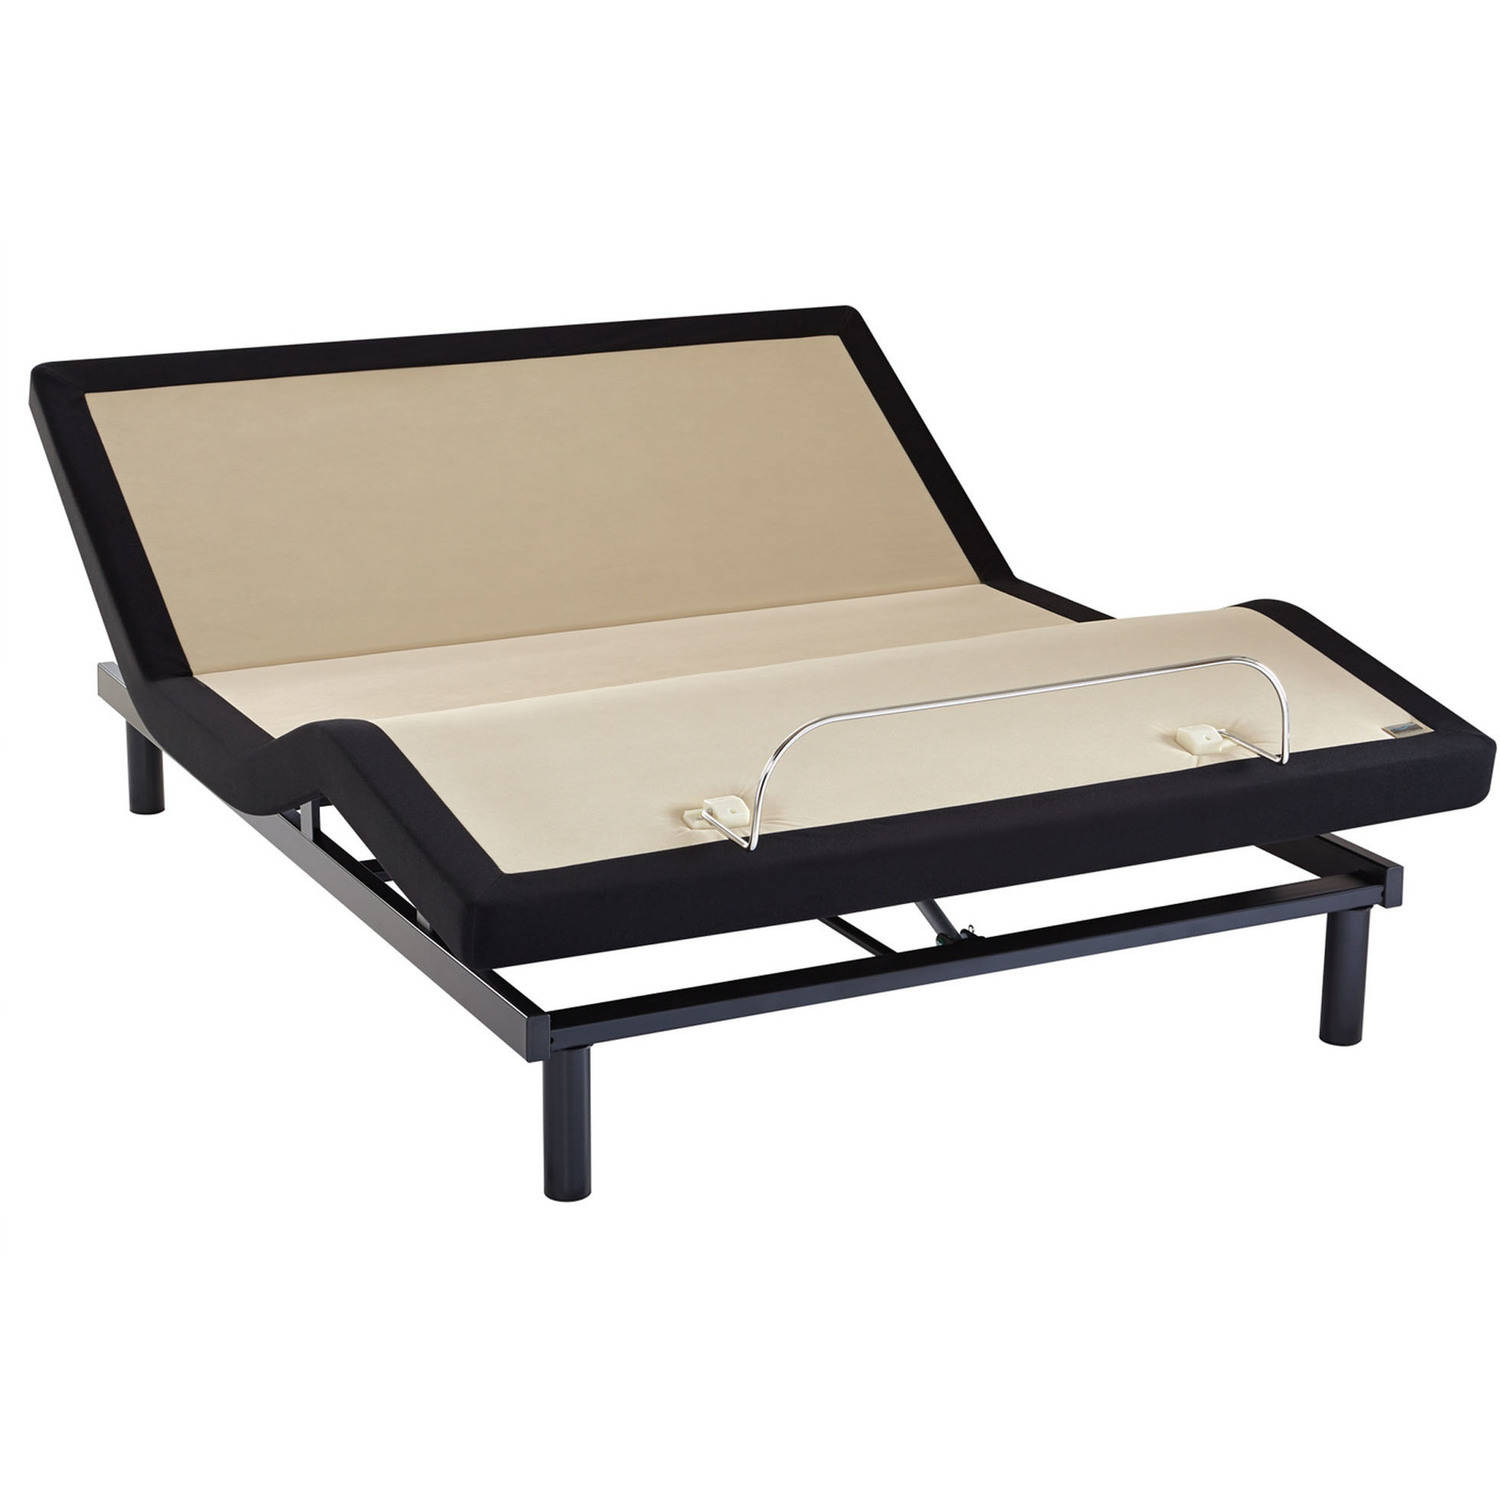 Sealy Ease Adjustable Bed Base 1.0, Twin XL - image 1 of 14